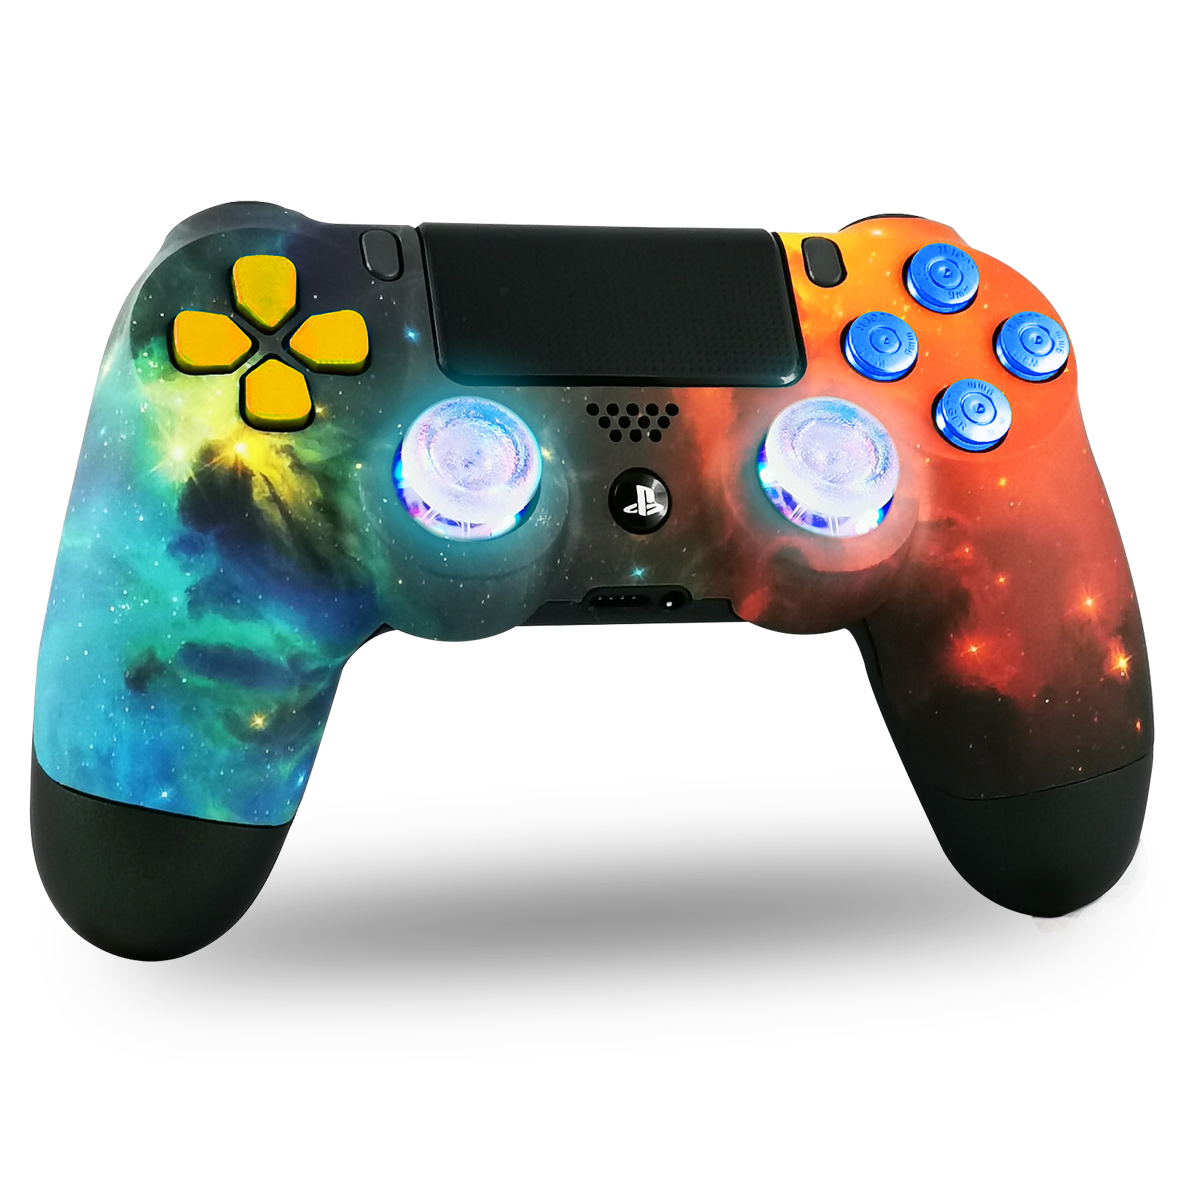 manette-PS4-custom-playstation-4-sony-personnalisee-drawmypad-perfect-dream